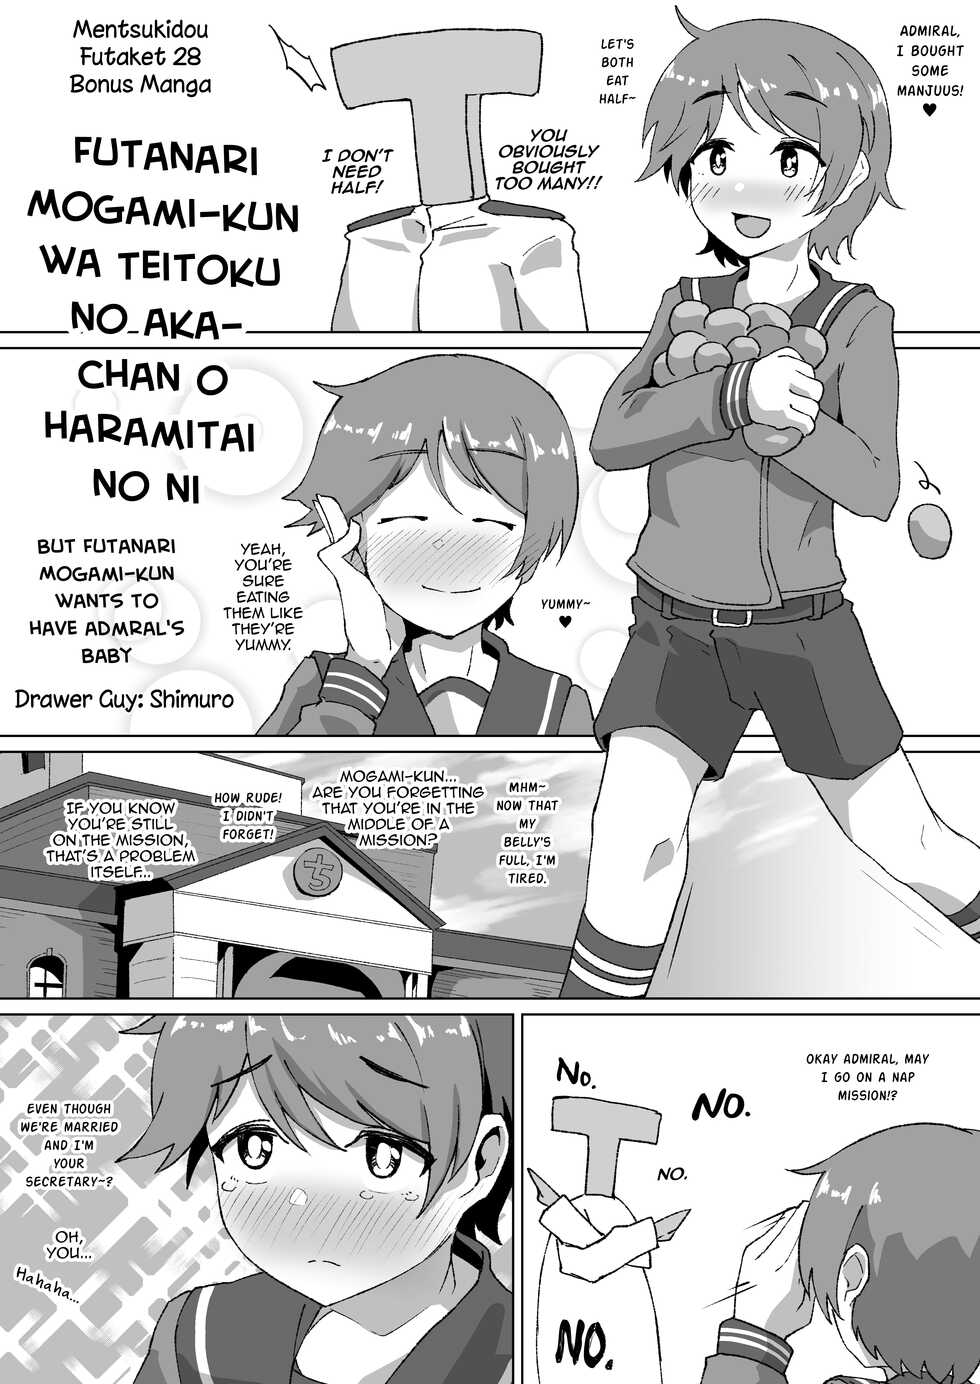 [Shimuro] Fanbox Works Collection (Granblue Fantasy, Kantai Collection -KanColle-) [English] [mysterymeat3] - Page 7